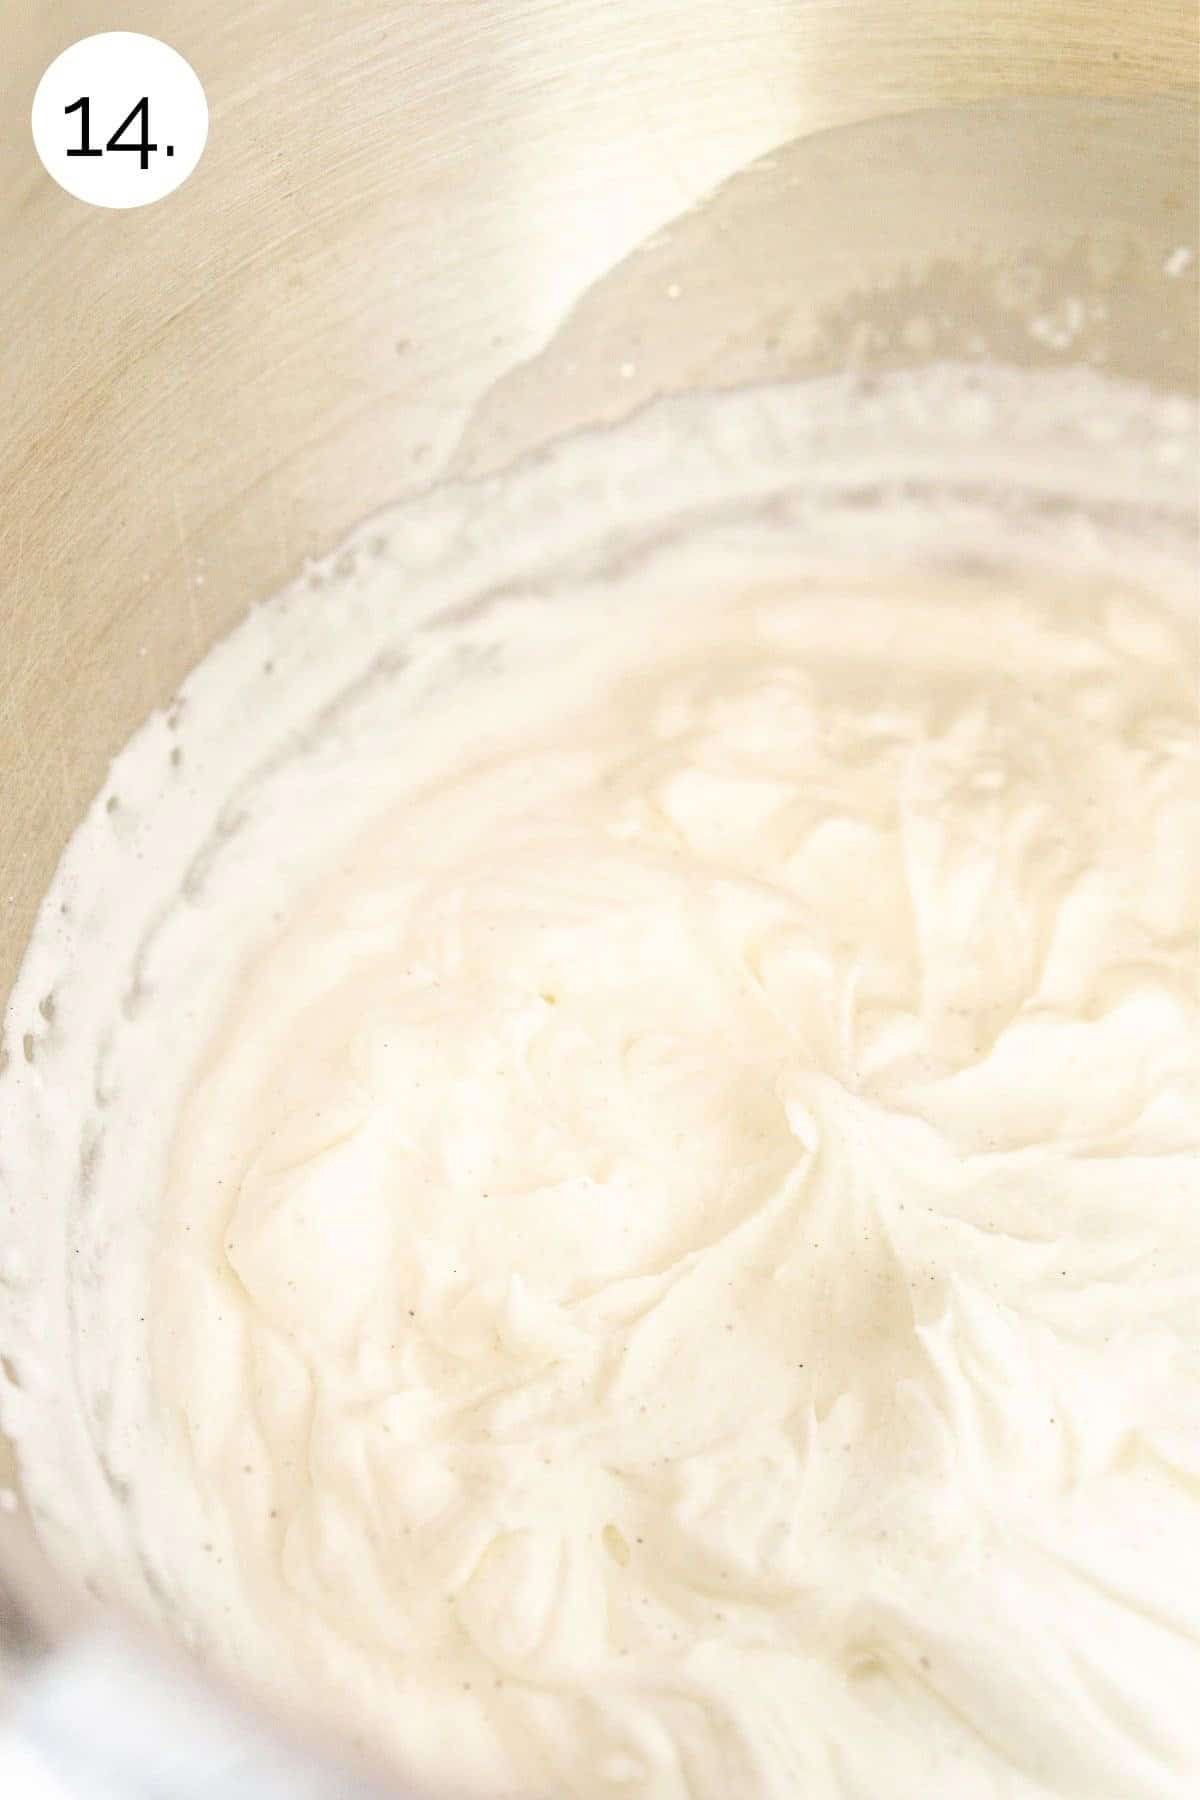 Beating the whipped cream in a mixing bowl until stiff peaks form.